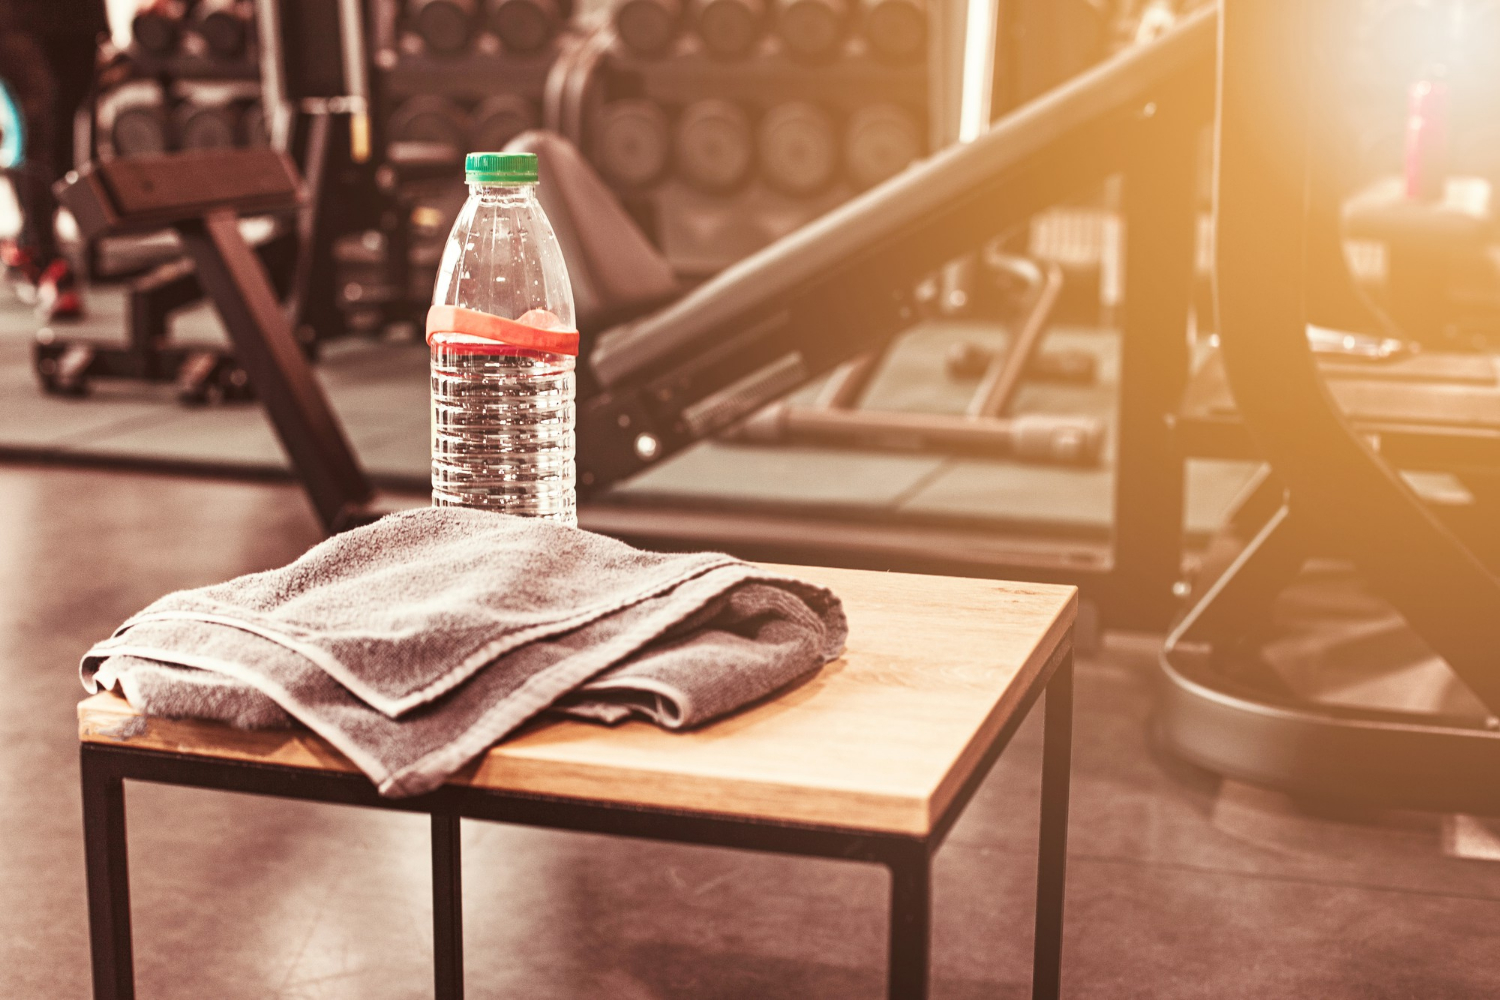 Water Bottle And Towel Fitness Equipment In Bodybuilding ym